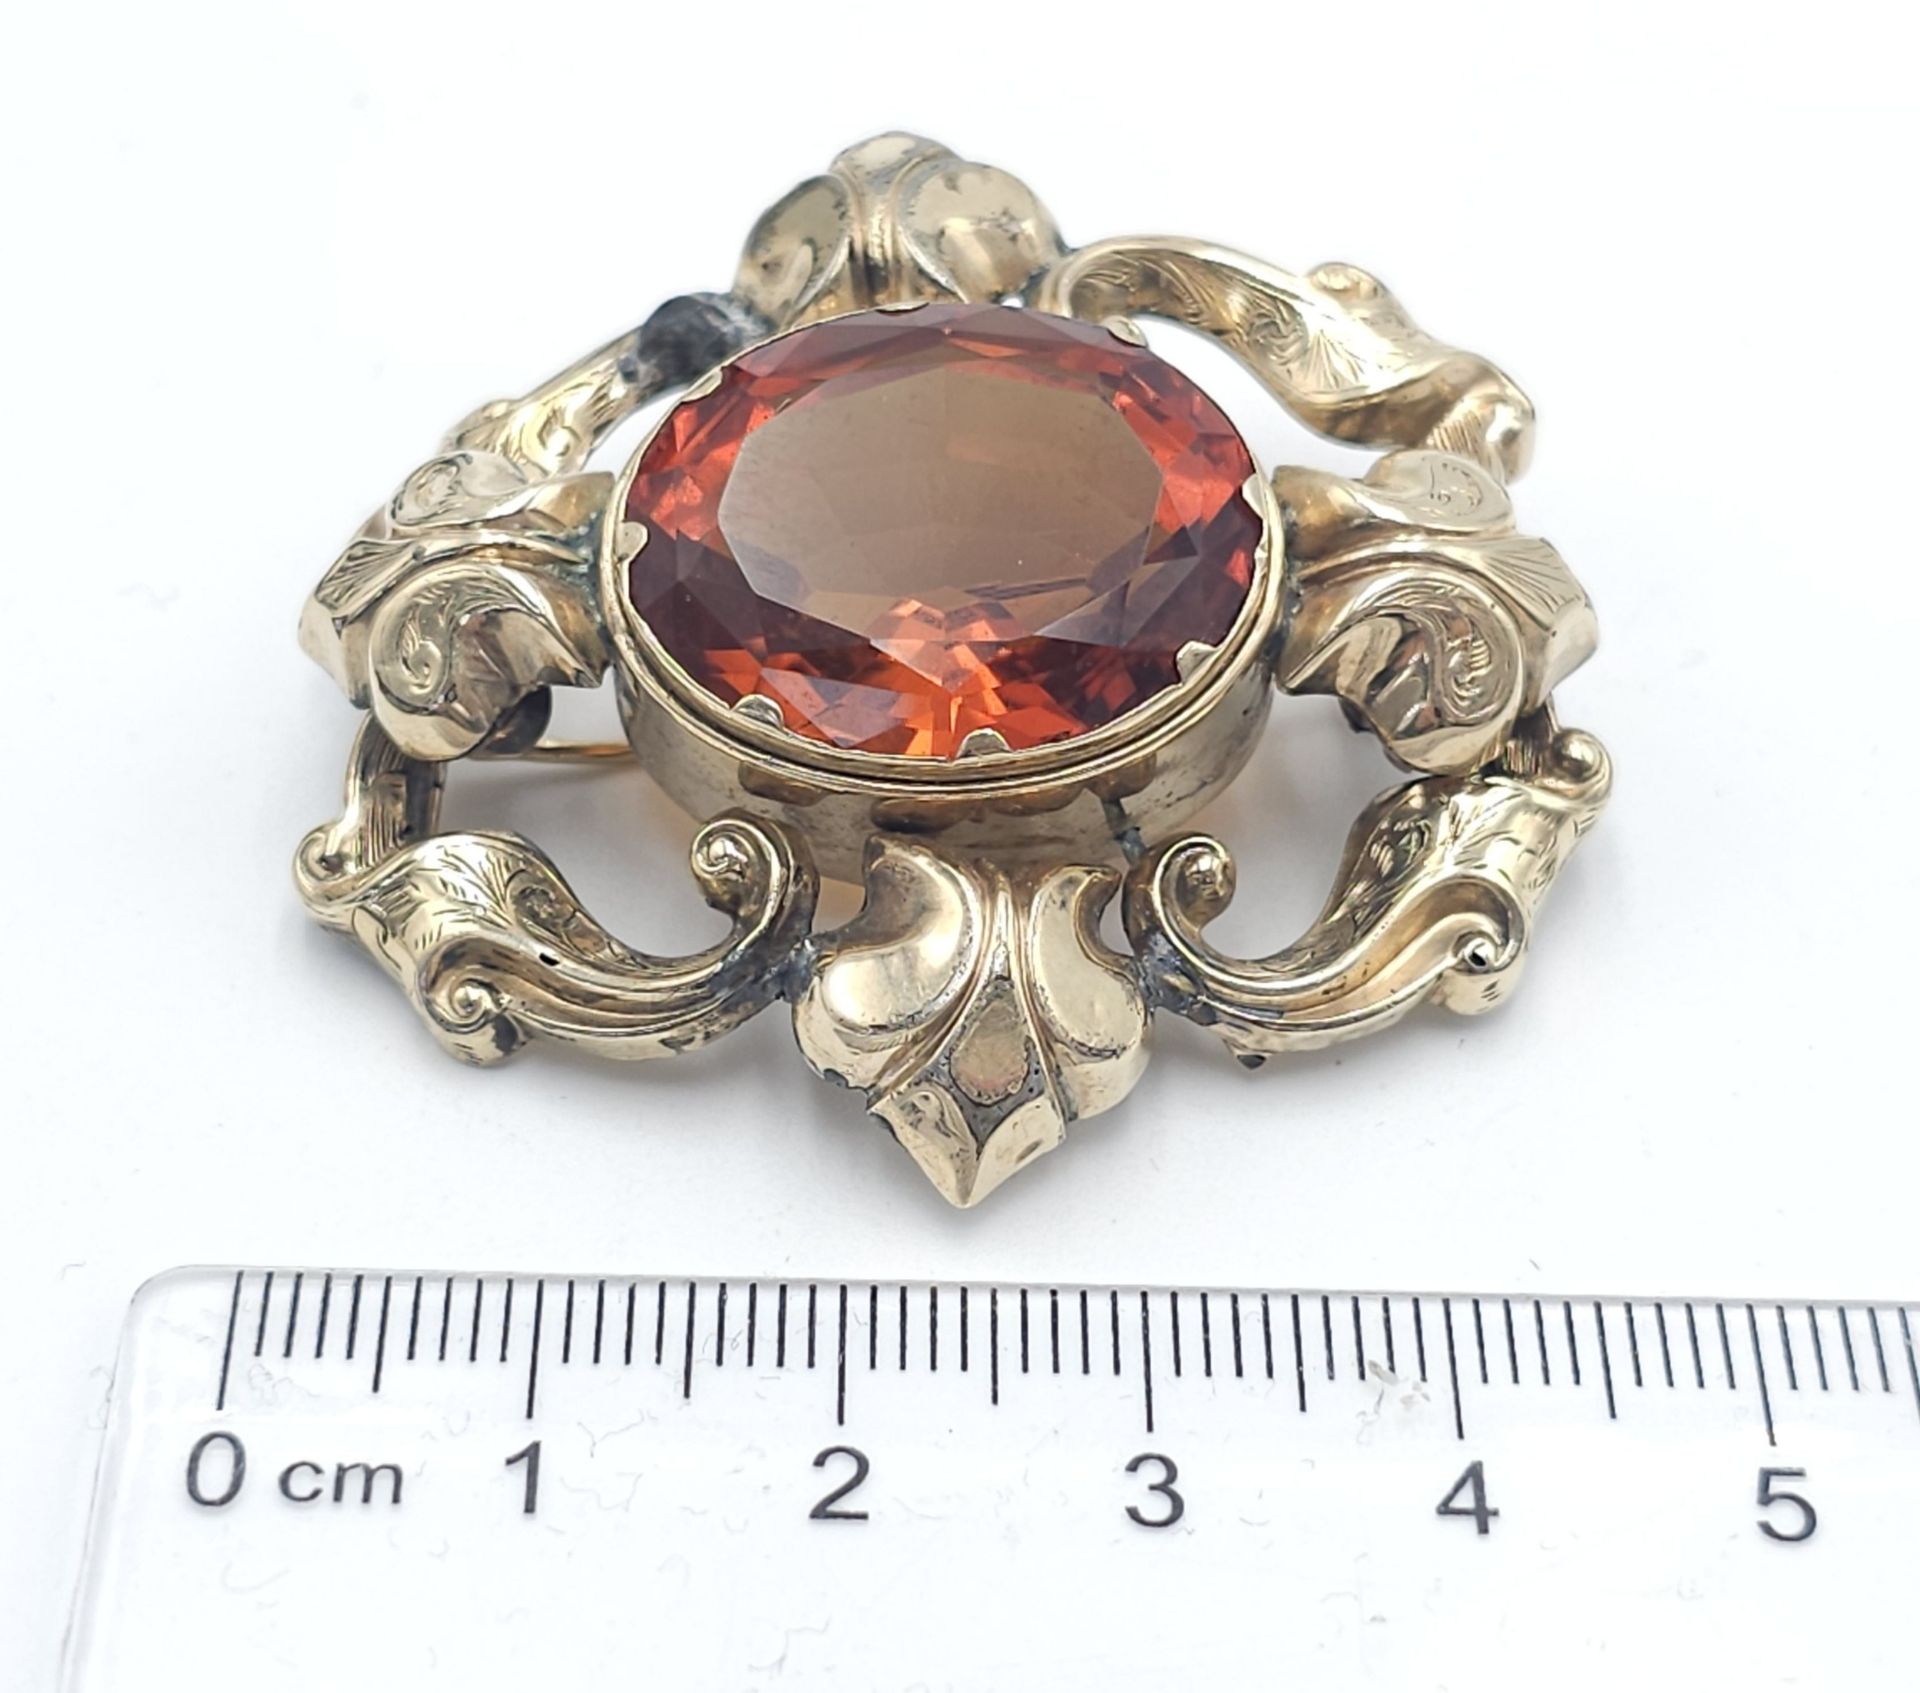 An Antique Large Citrine Brooch - Set in yellow metal. 5cm - Image 7 of 7